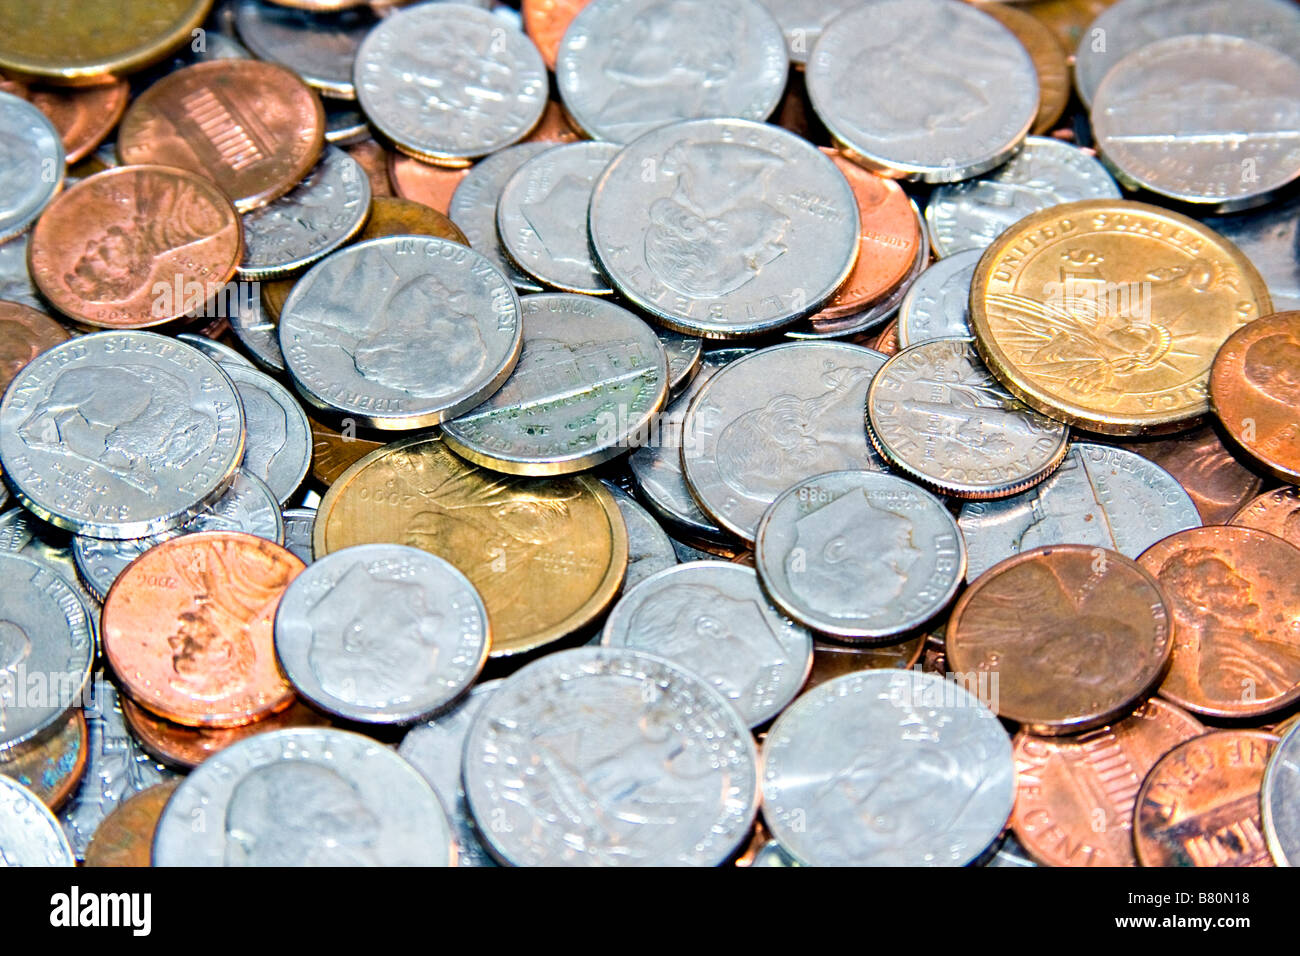 US Currency.  Pennies, Nickels, Dimes, Quarters and Dollar Coins. Stock Photo